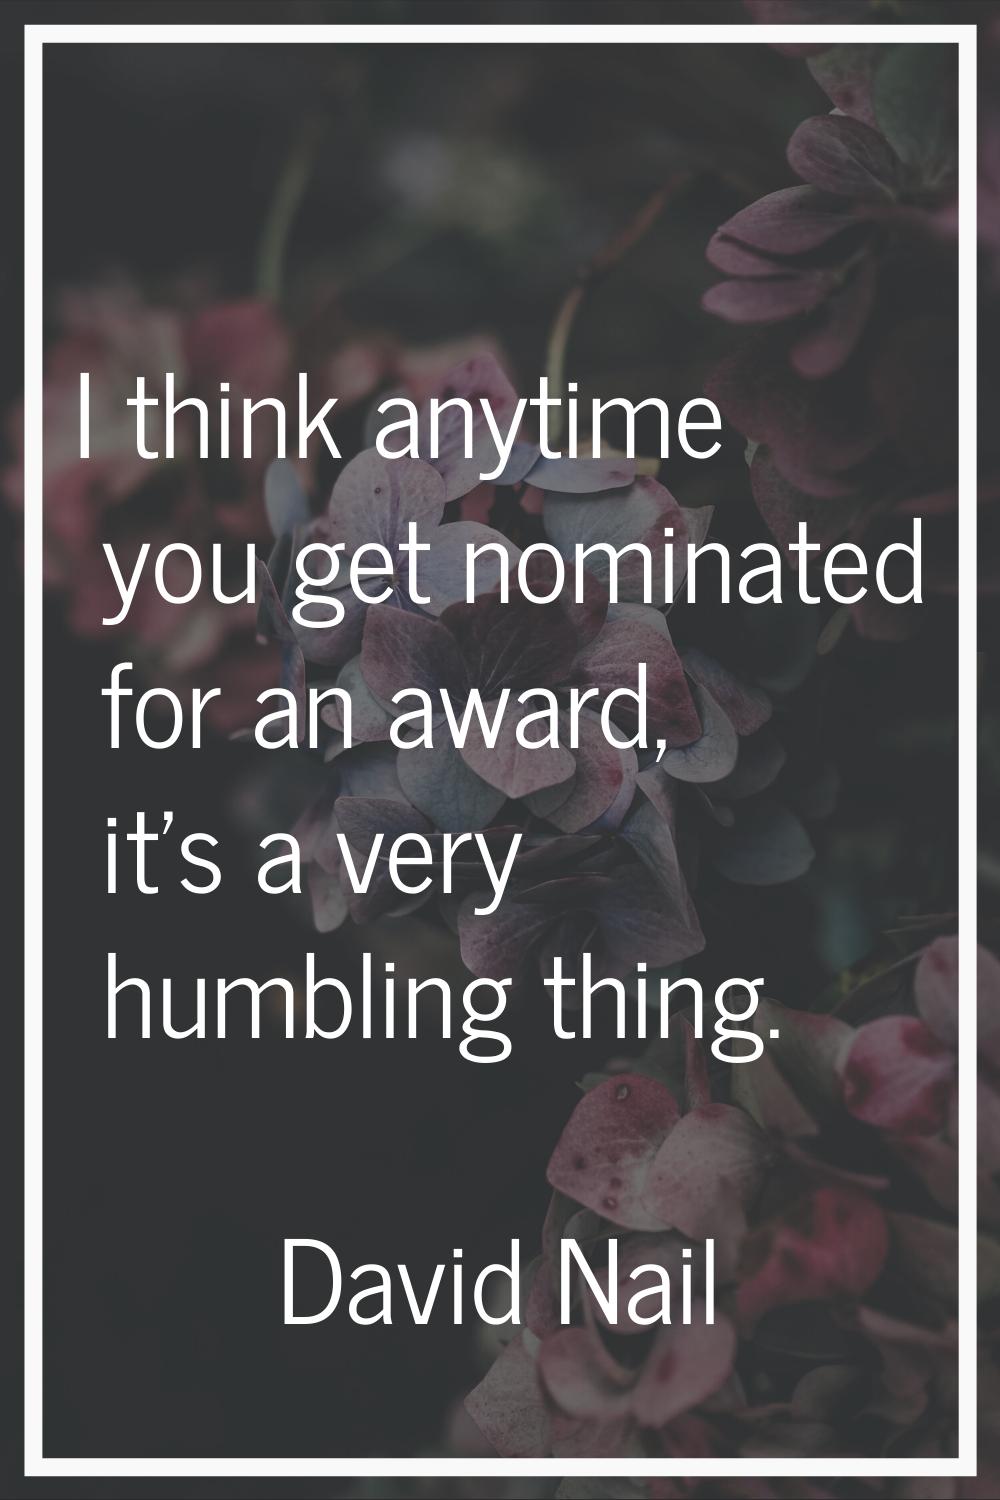 I think anytime you get nominated for an award, it's a very humbling thing.